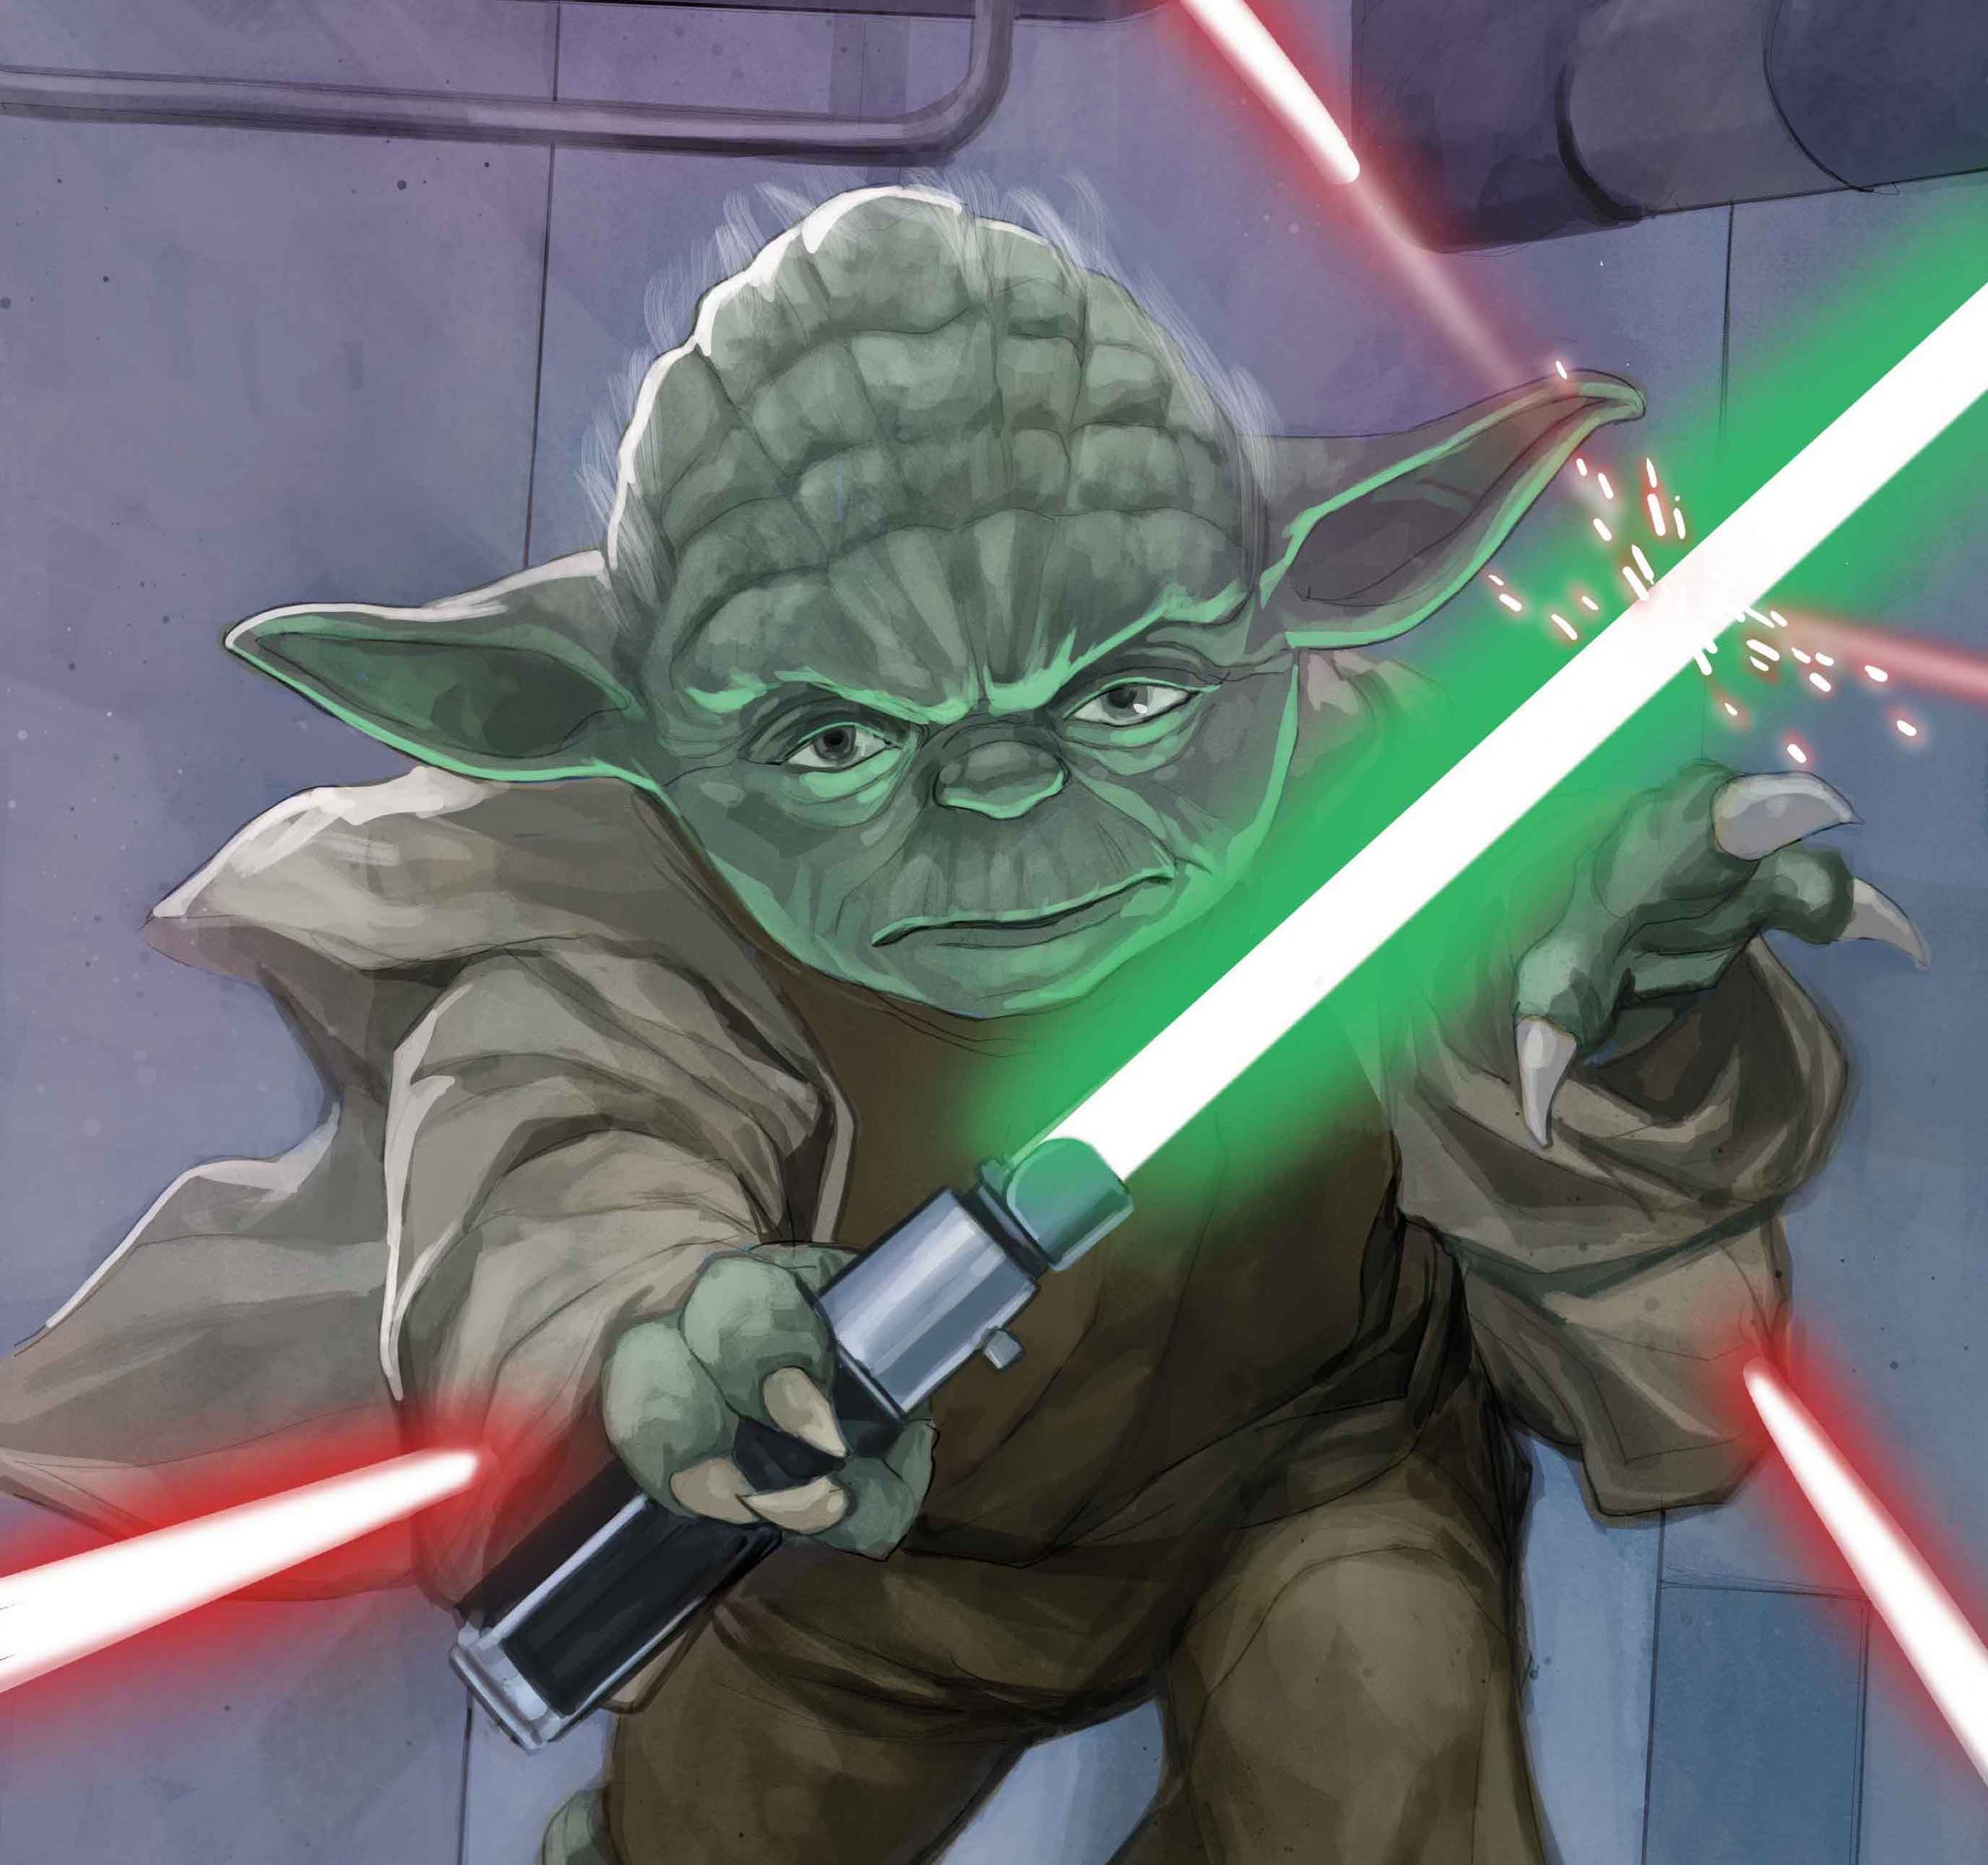 'Star Wars: Yoda' #1 shows off Yoda's fighting prowess